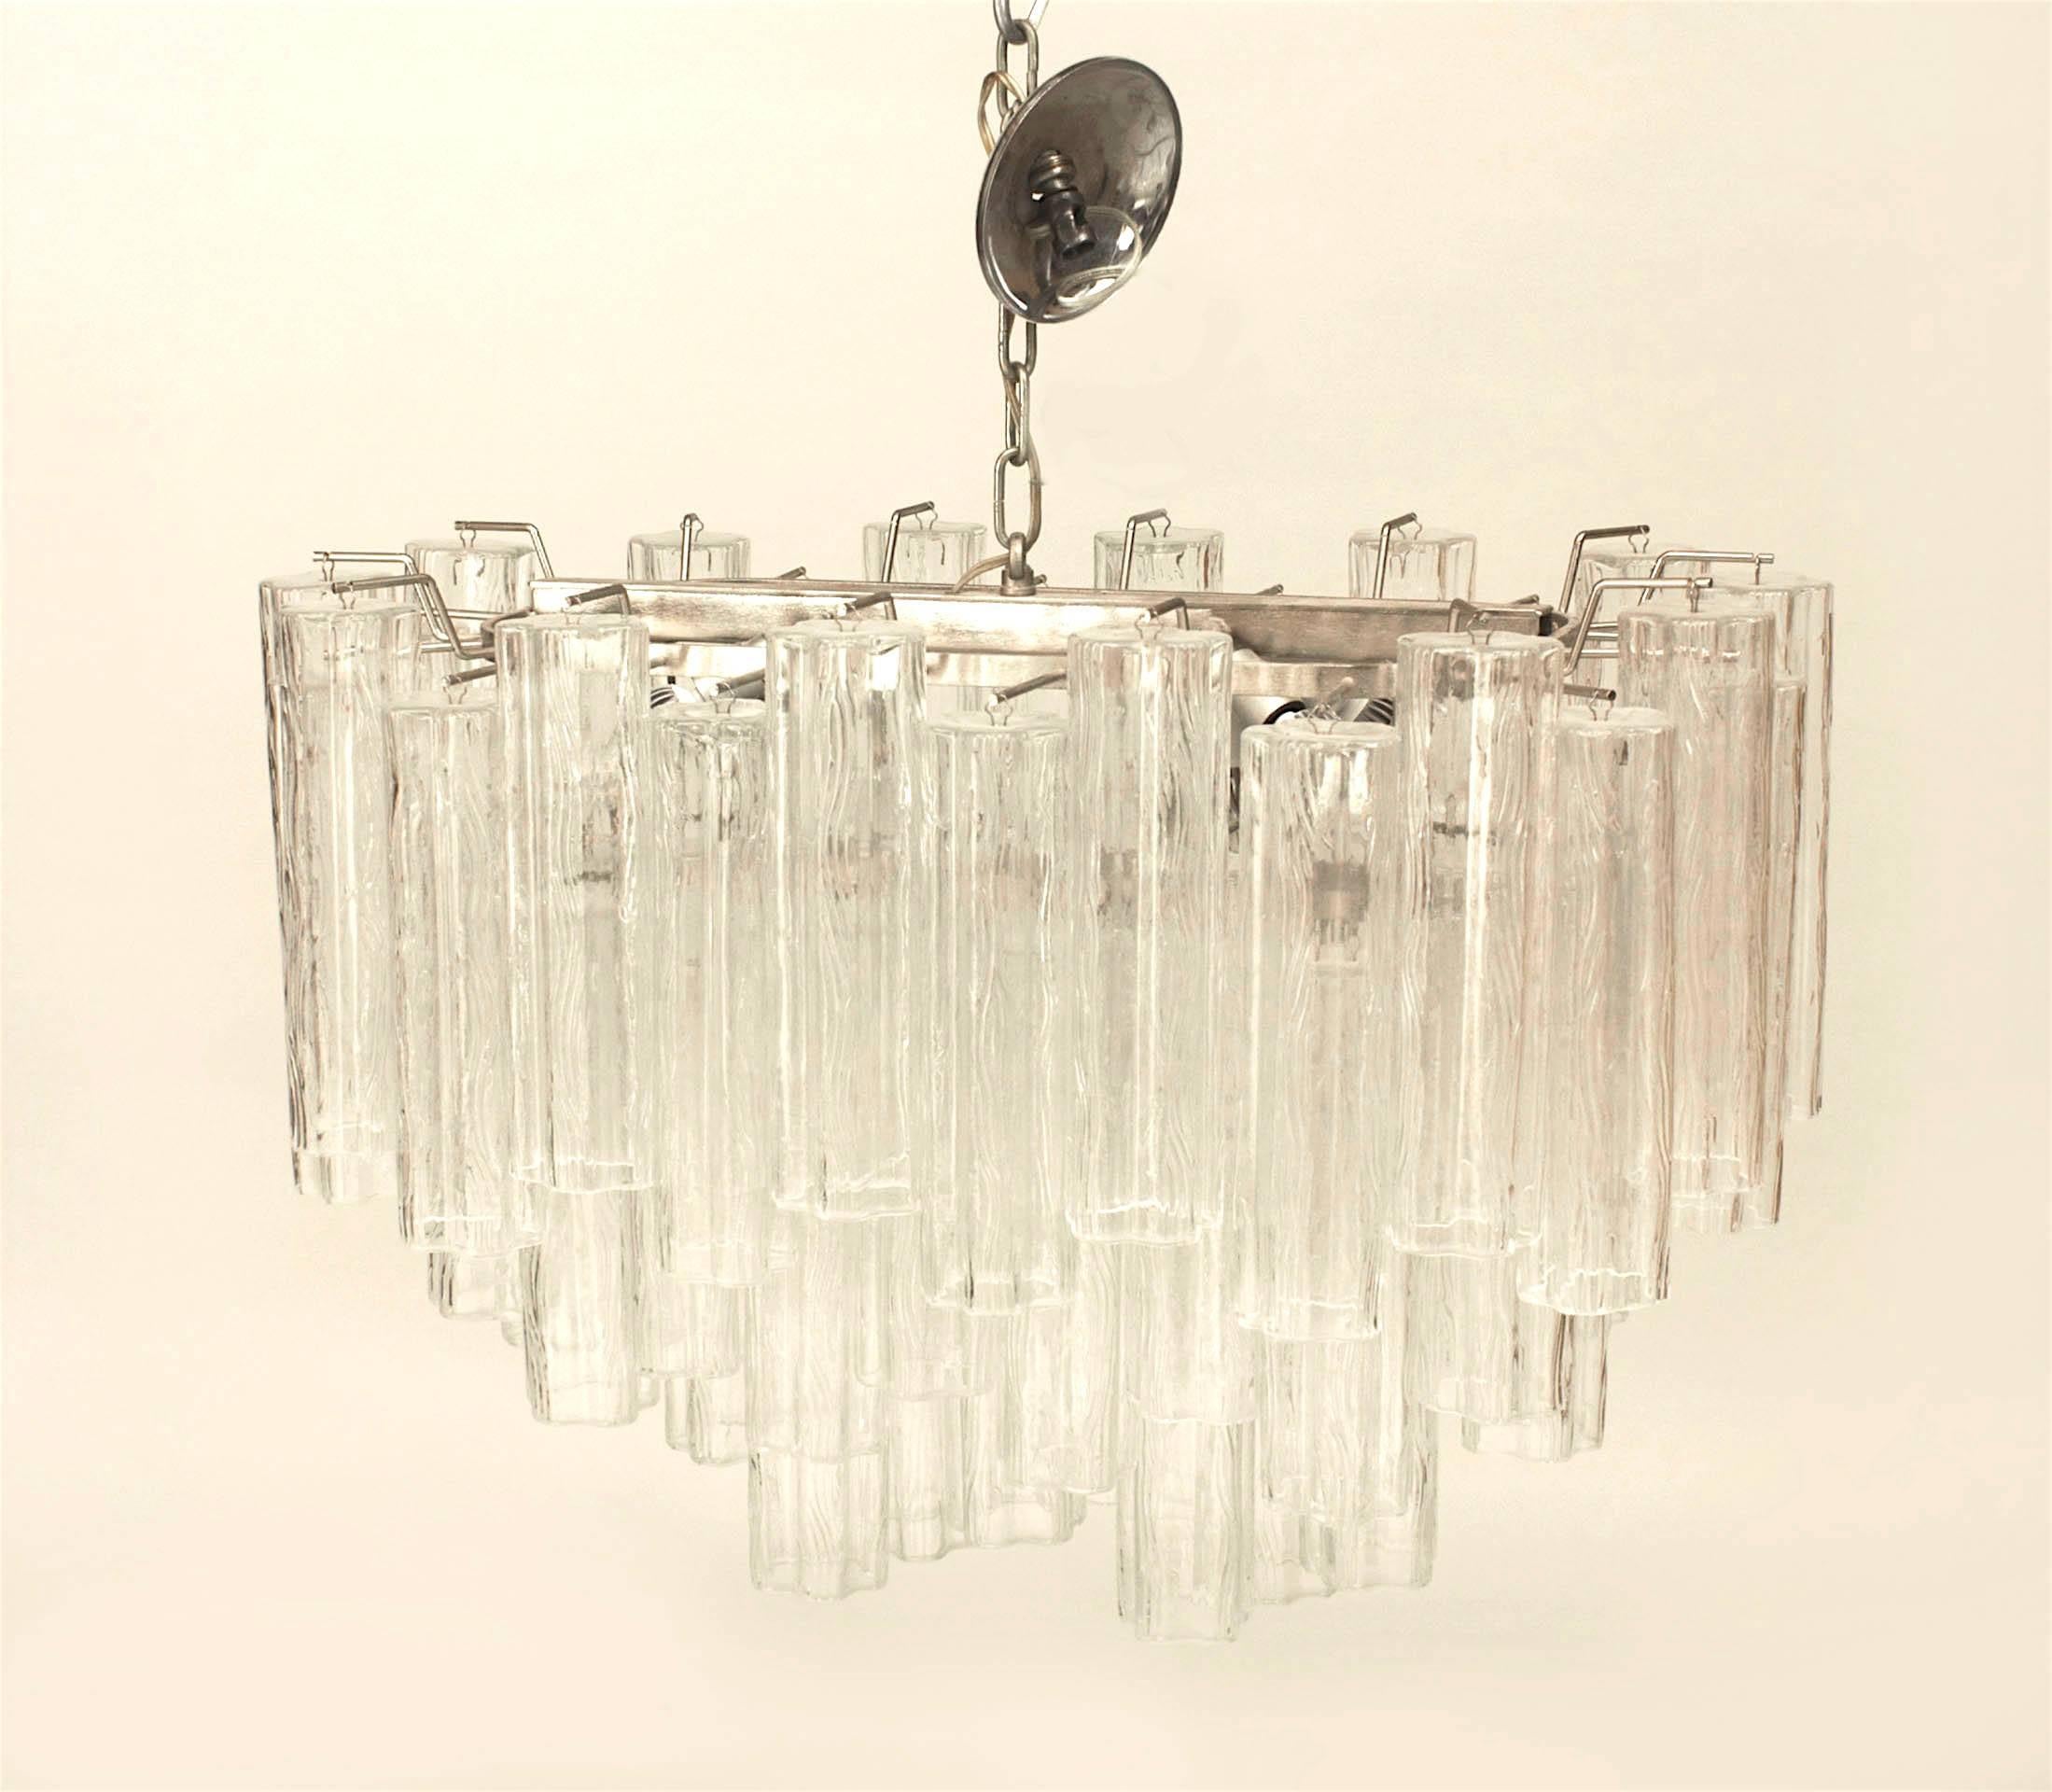 Italian Post-War Design (1970's) multi-tiered oval shaped chandelier with long crystal tubes (CAMER)
